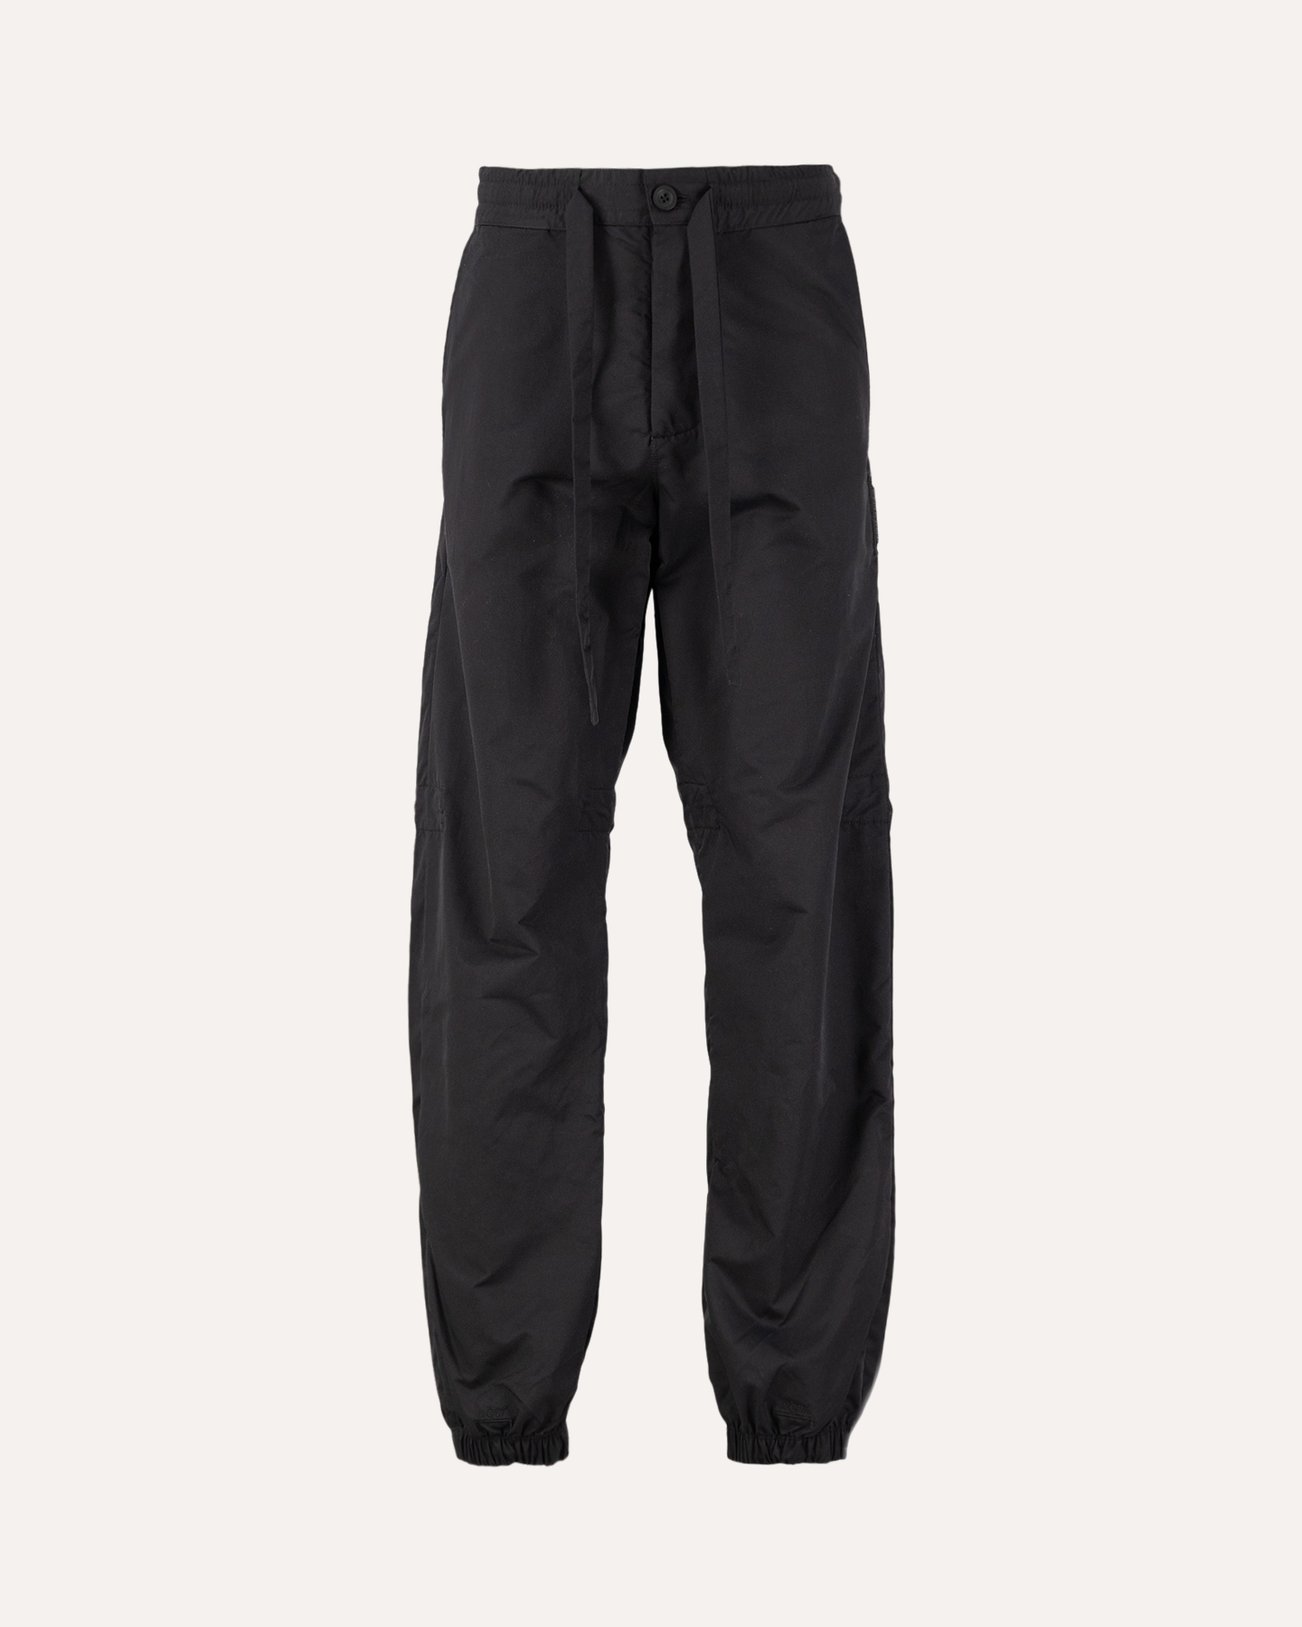 A-COLD-WALL* Cinch Pant DONKERGRIJS 1